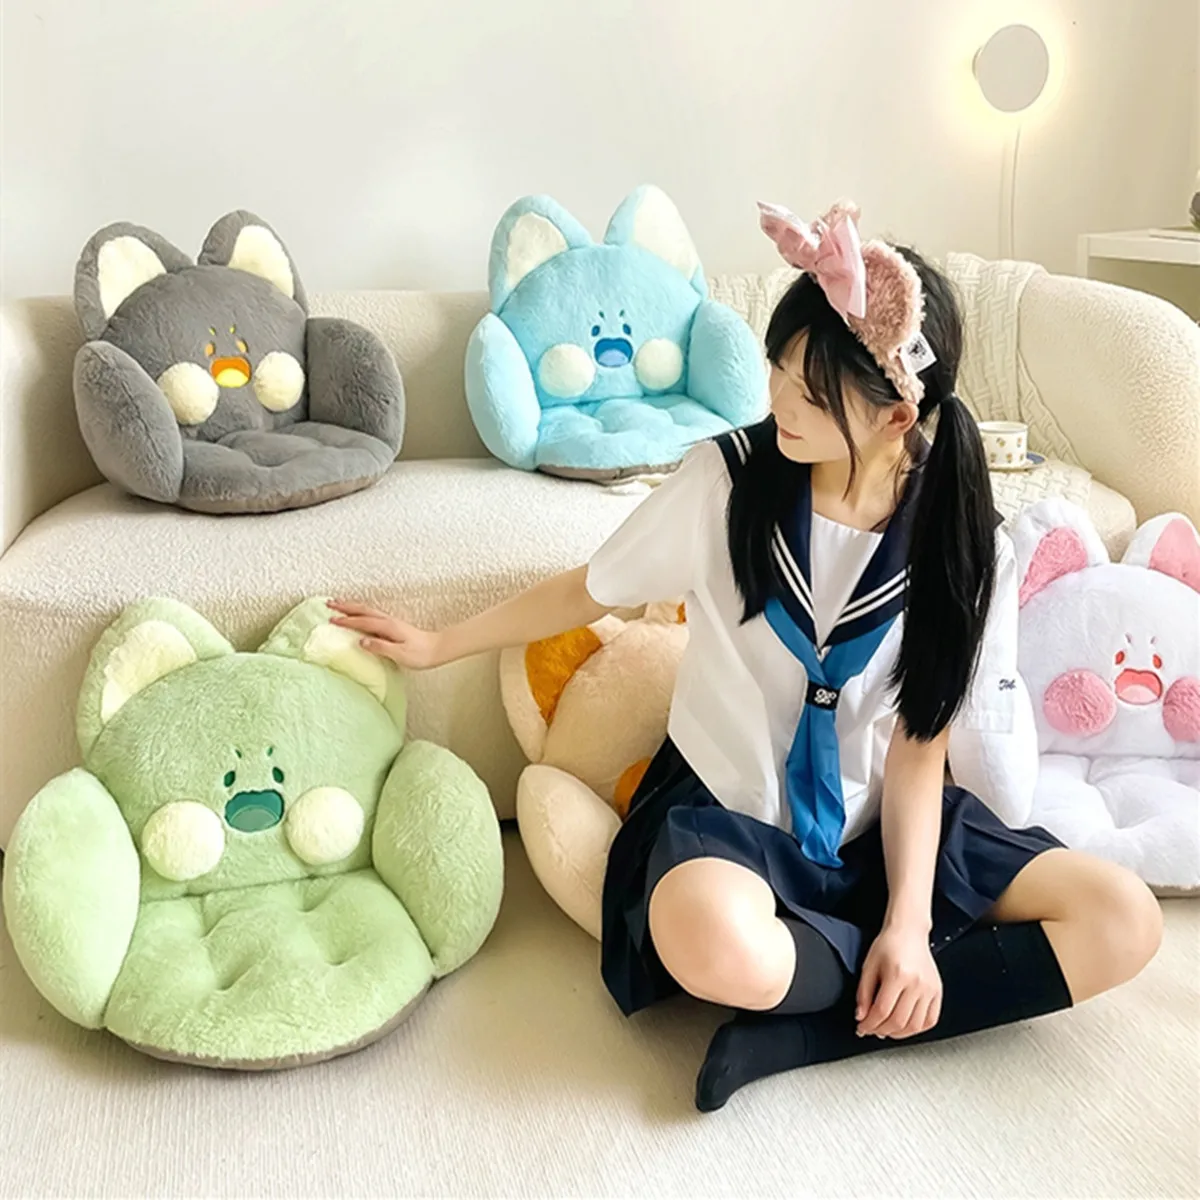 https://ae01.alicdn.com/kf/Sf59b473406a4440192a9f442d456b64aH/Cat-Cushion-Pillow-Comfy-Kawaii-Chair-Cushion-Necessary-For-Office-And-Bedroom-Single-Seat-Back-Home.jpg